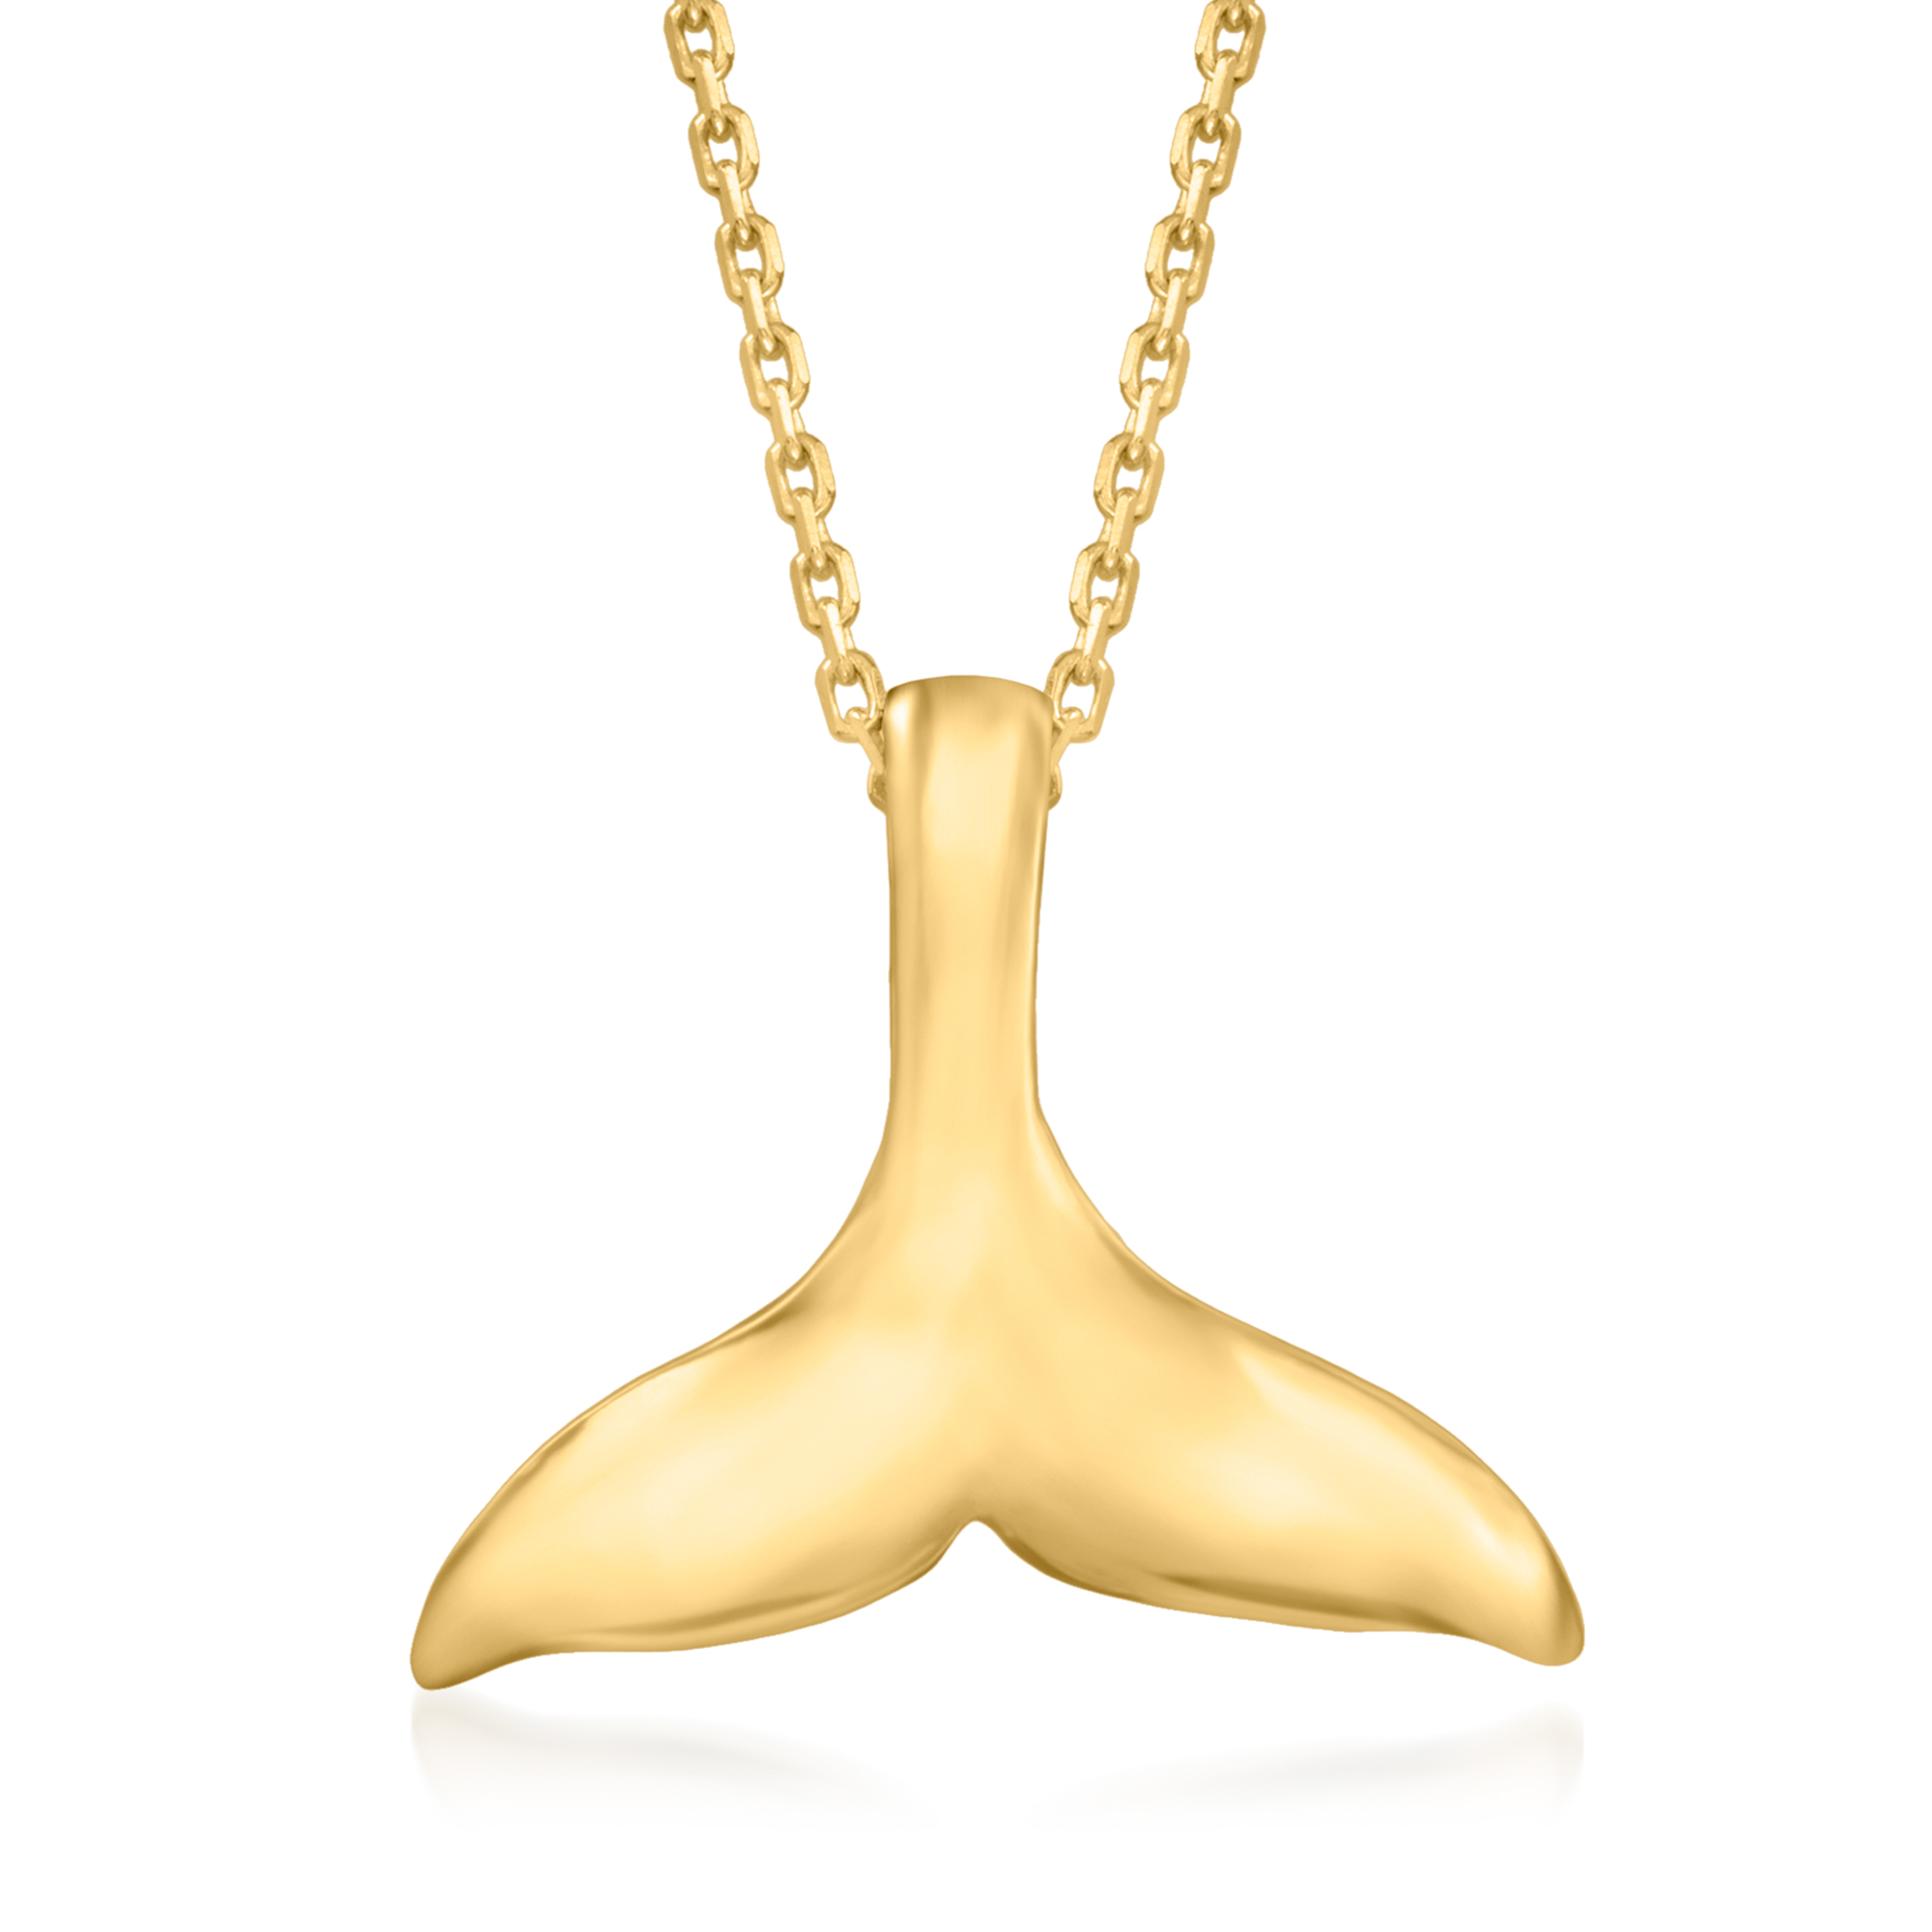 Gold Nantucket Whale Necklace – ACK 4170®